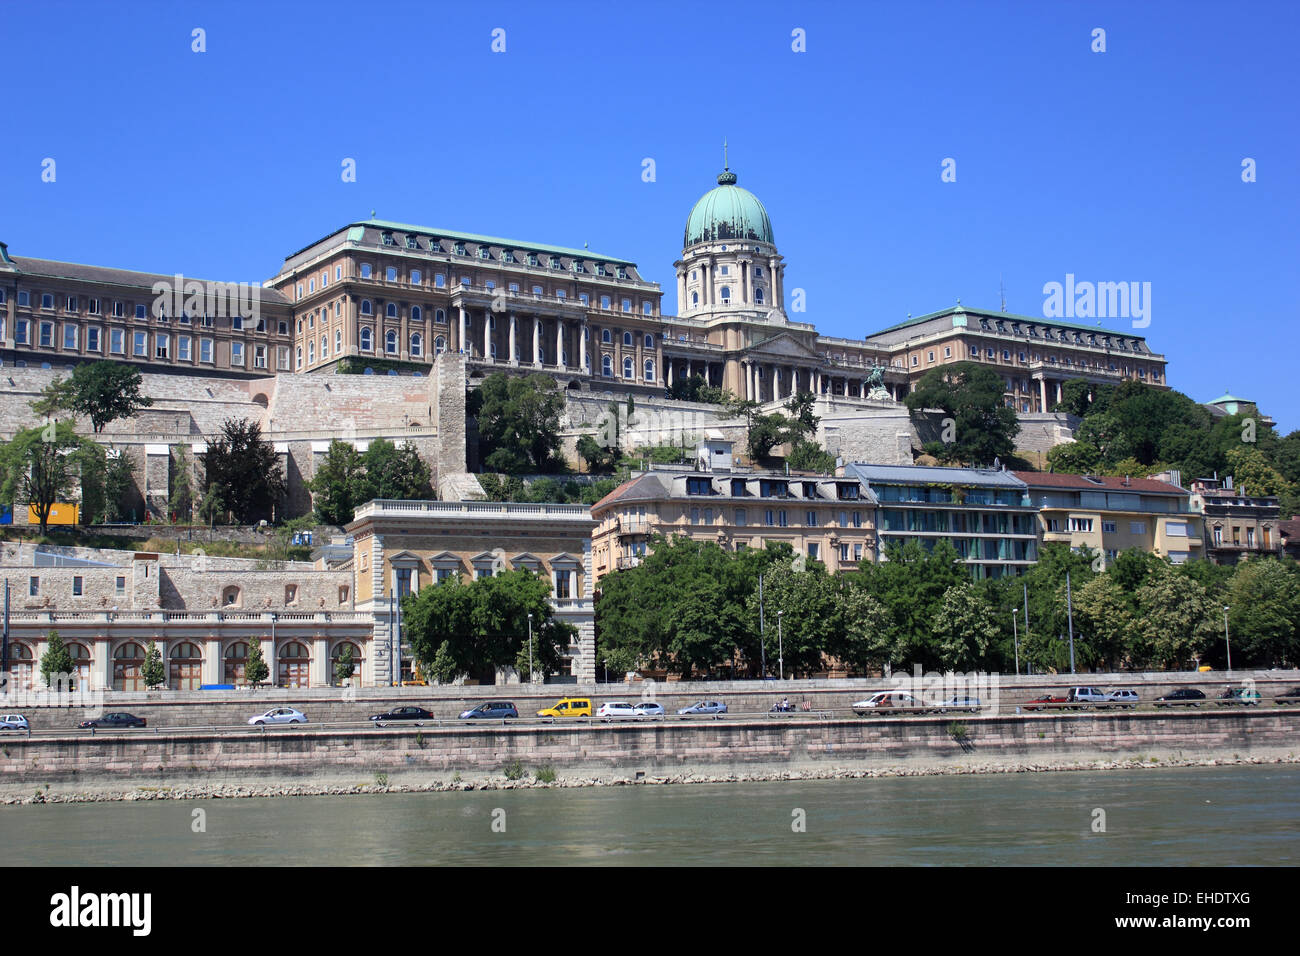 Royal Palace on Castle Hill seen from the Danube River, Budapest, Hungary, Europe Stock Photo